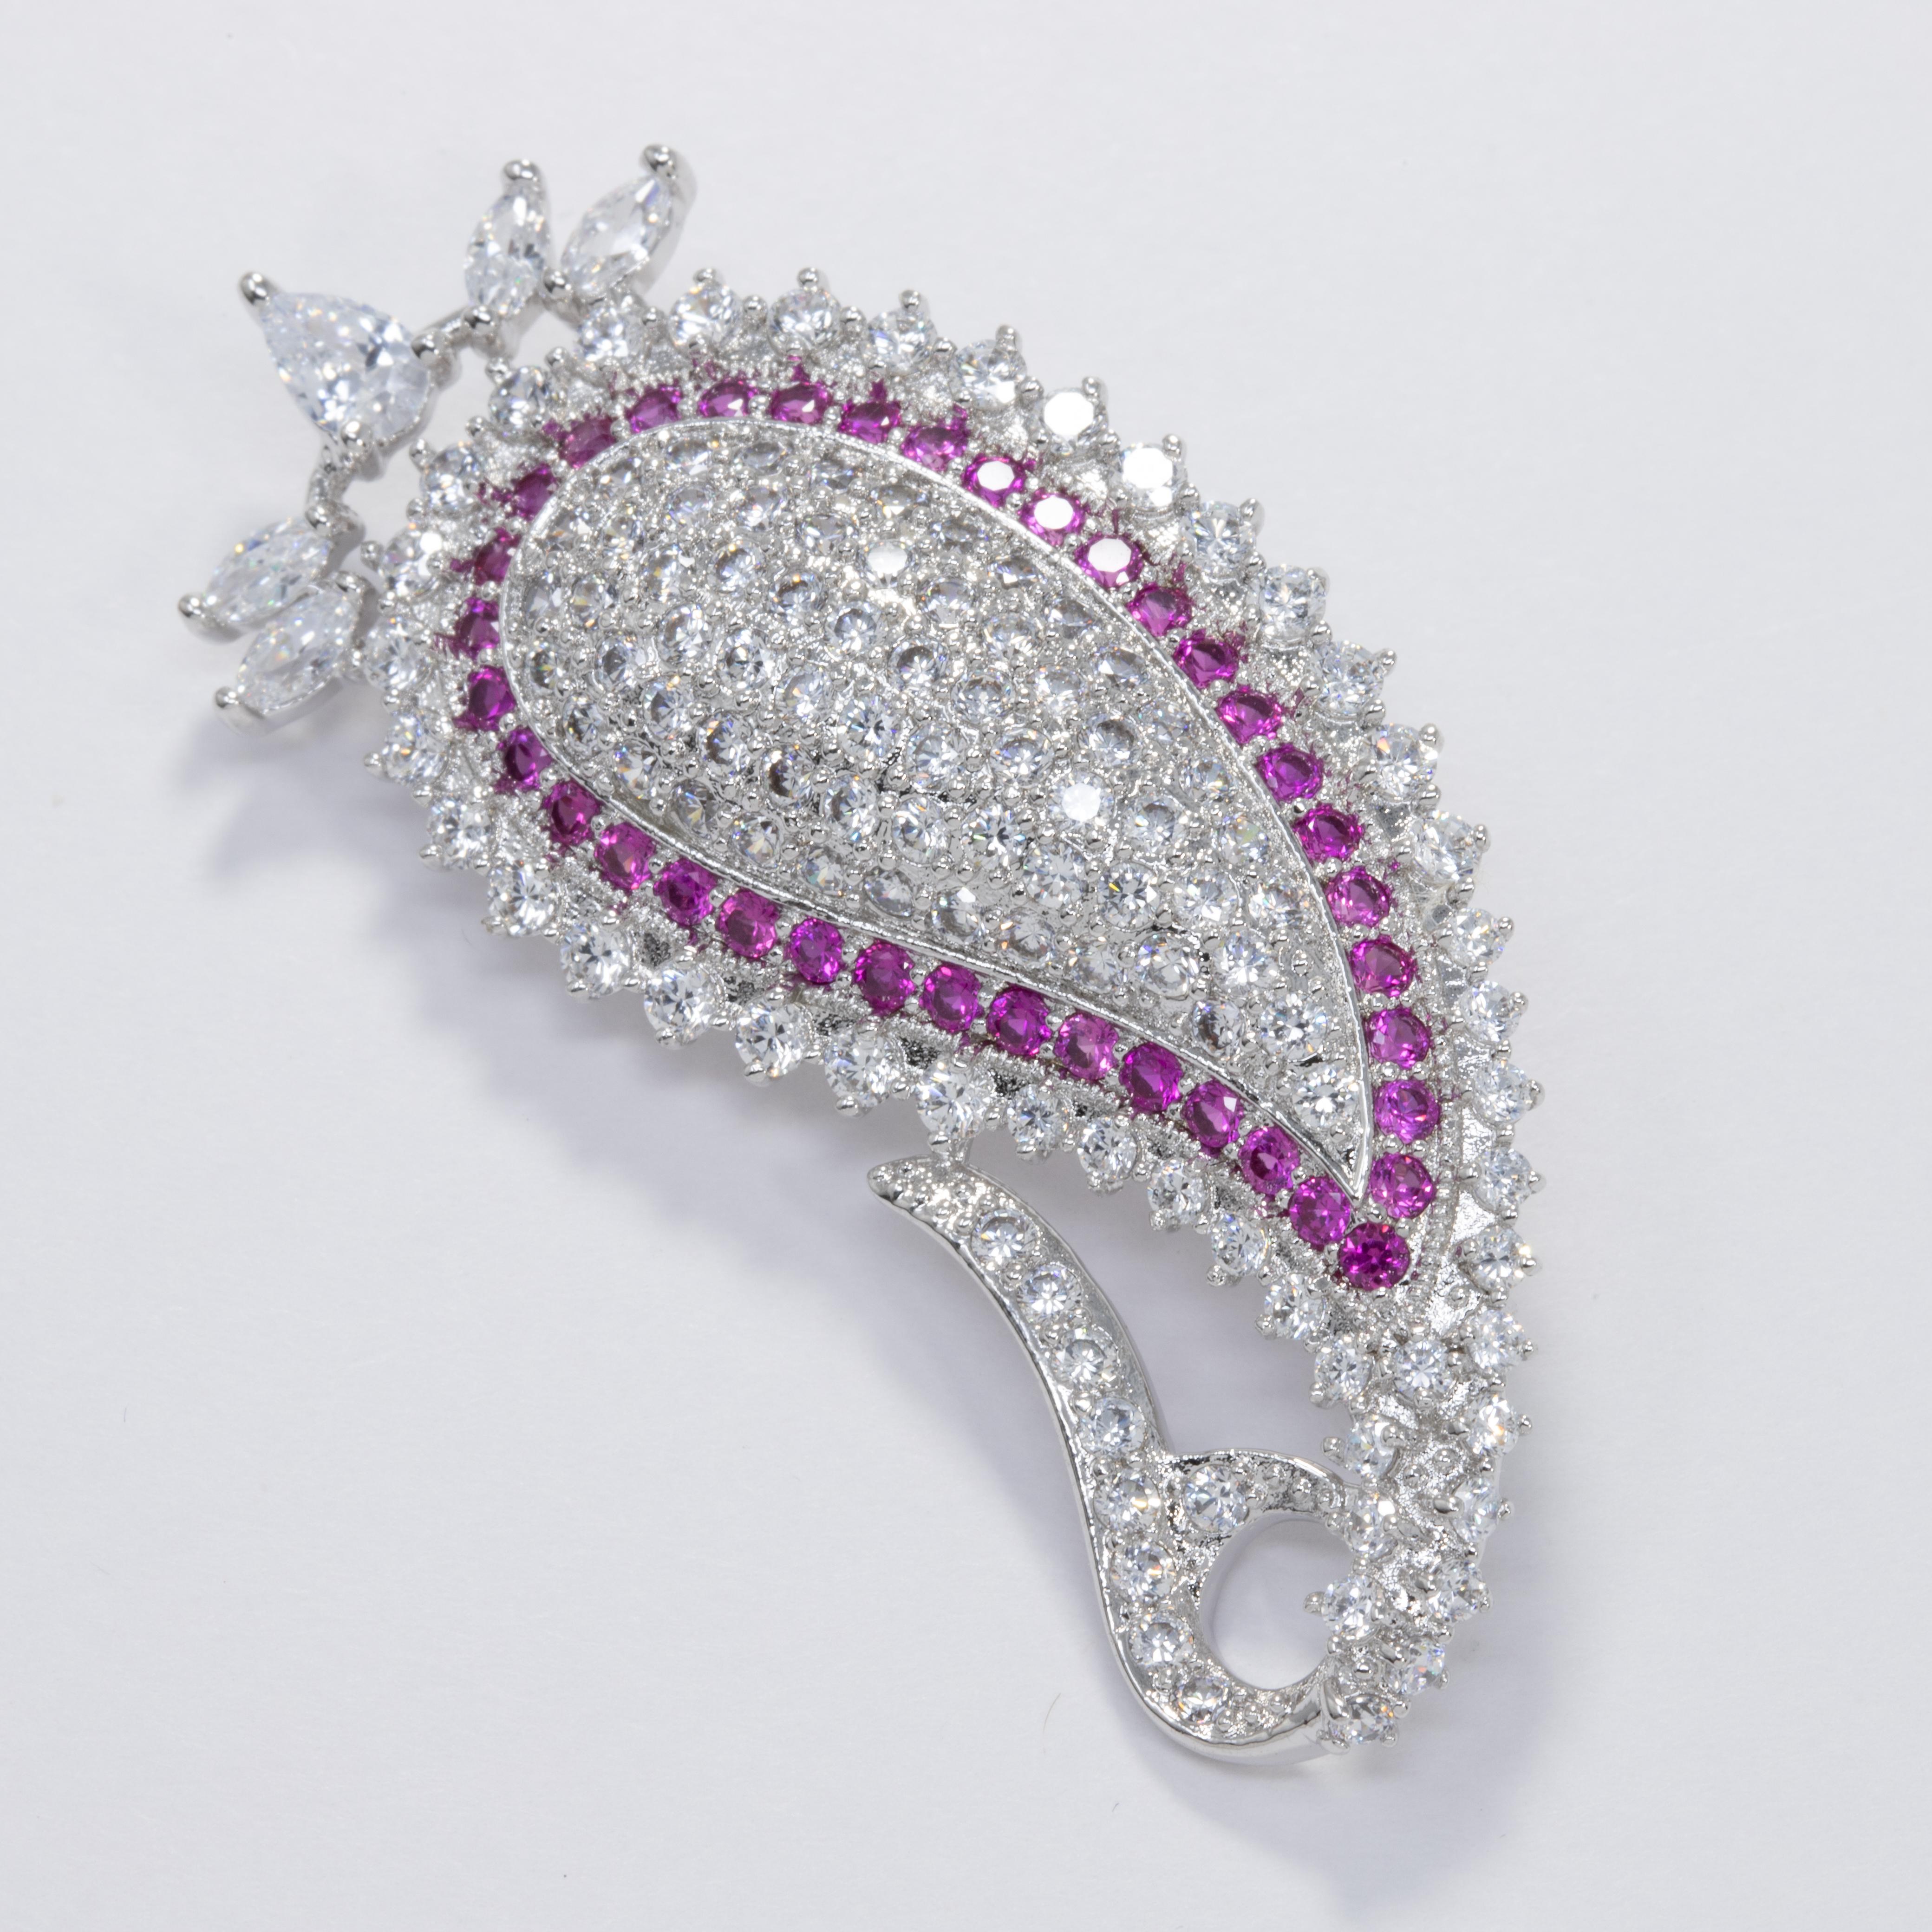 Sparkling brooch by Kenneth Jay Lane - a pave clear cubic zirconia crystal paisley motif accented with an amethyst crystal outline.

Hallmarks: KJLane